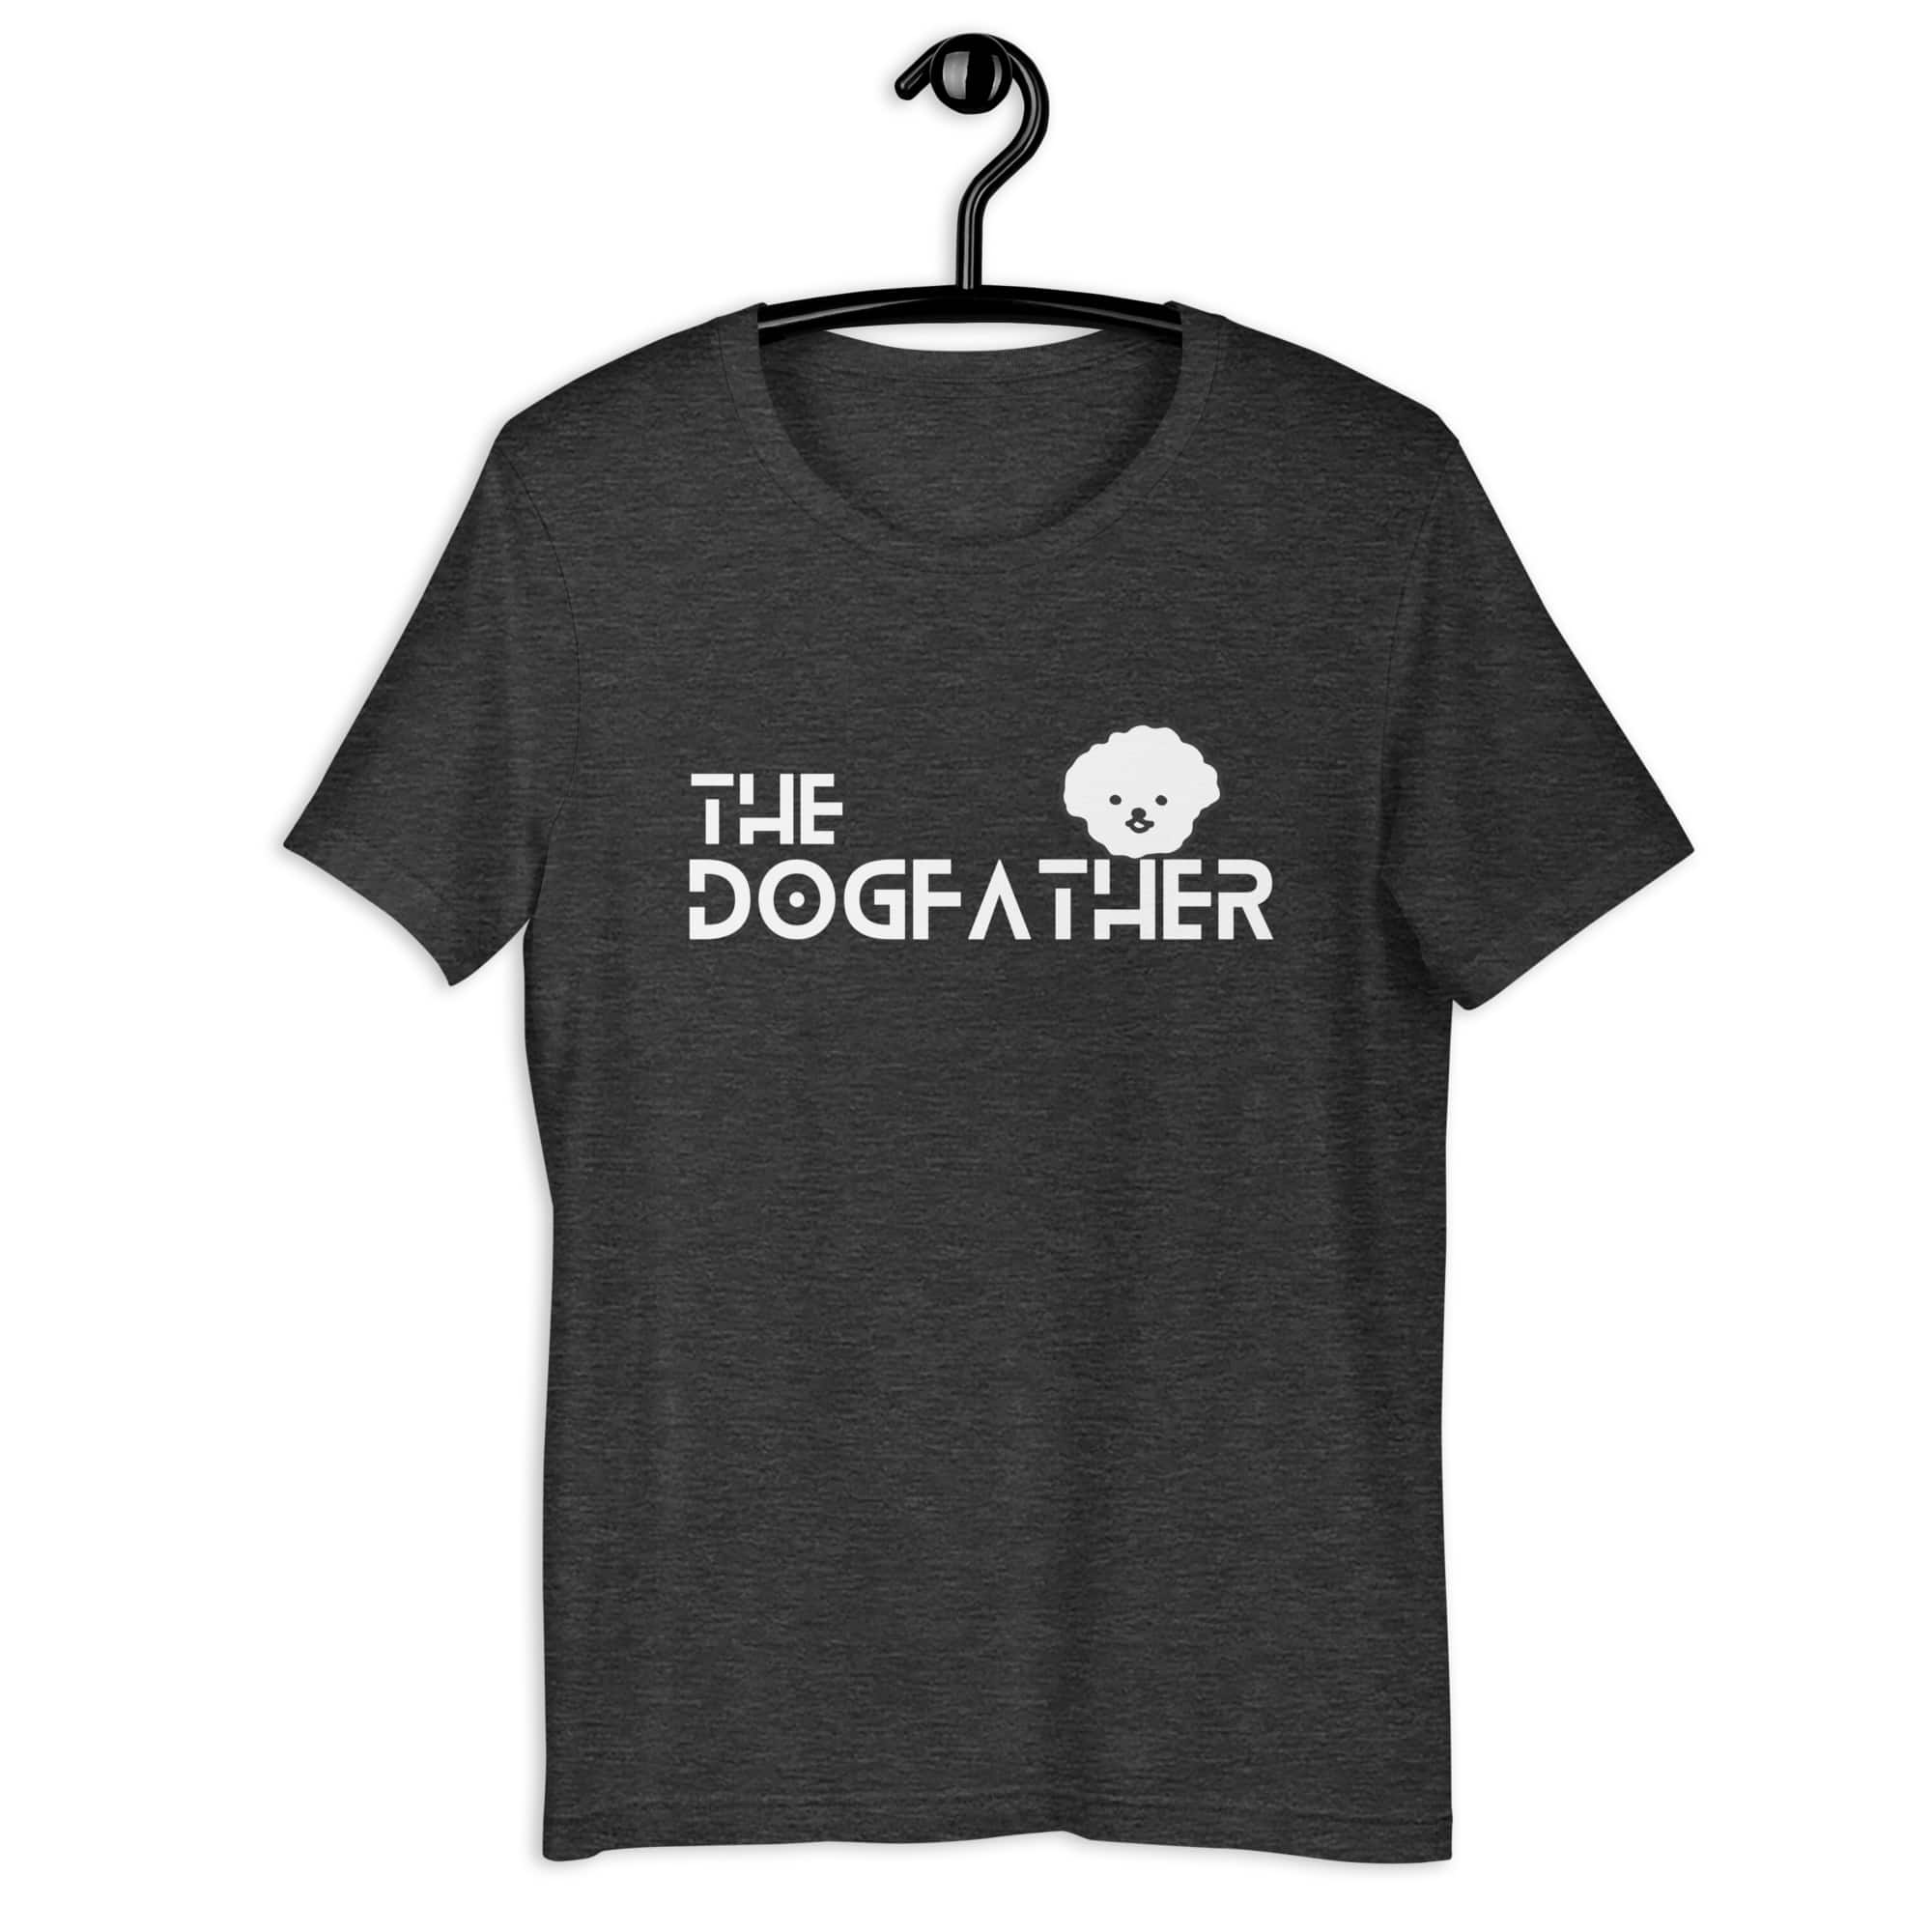 The Dogfather Poodles Unisex T-Shirt. Dark Grey